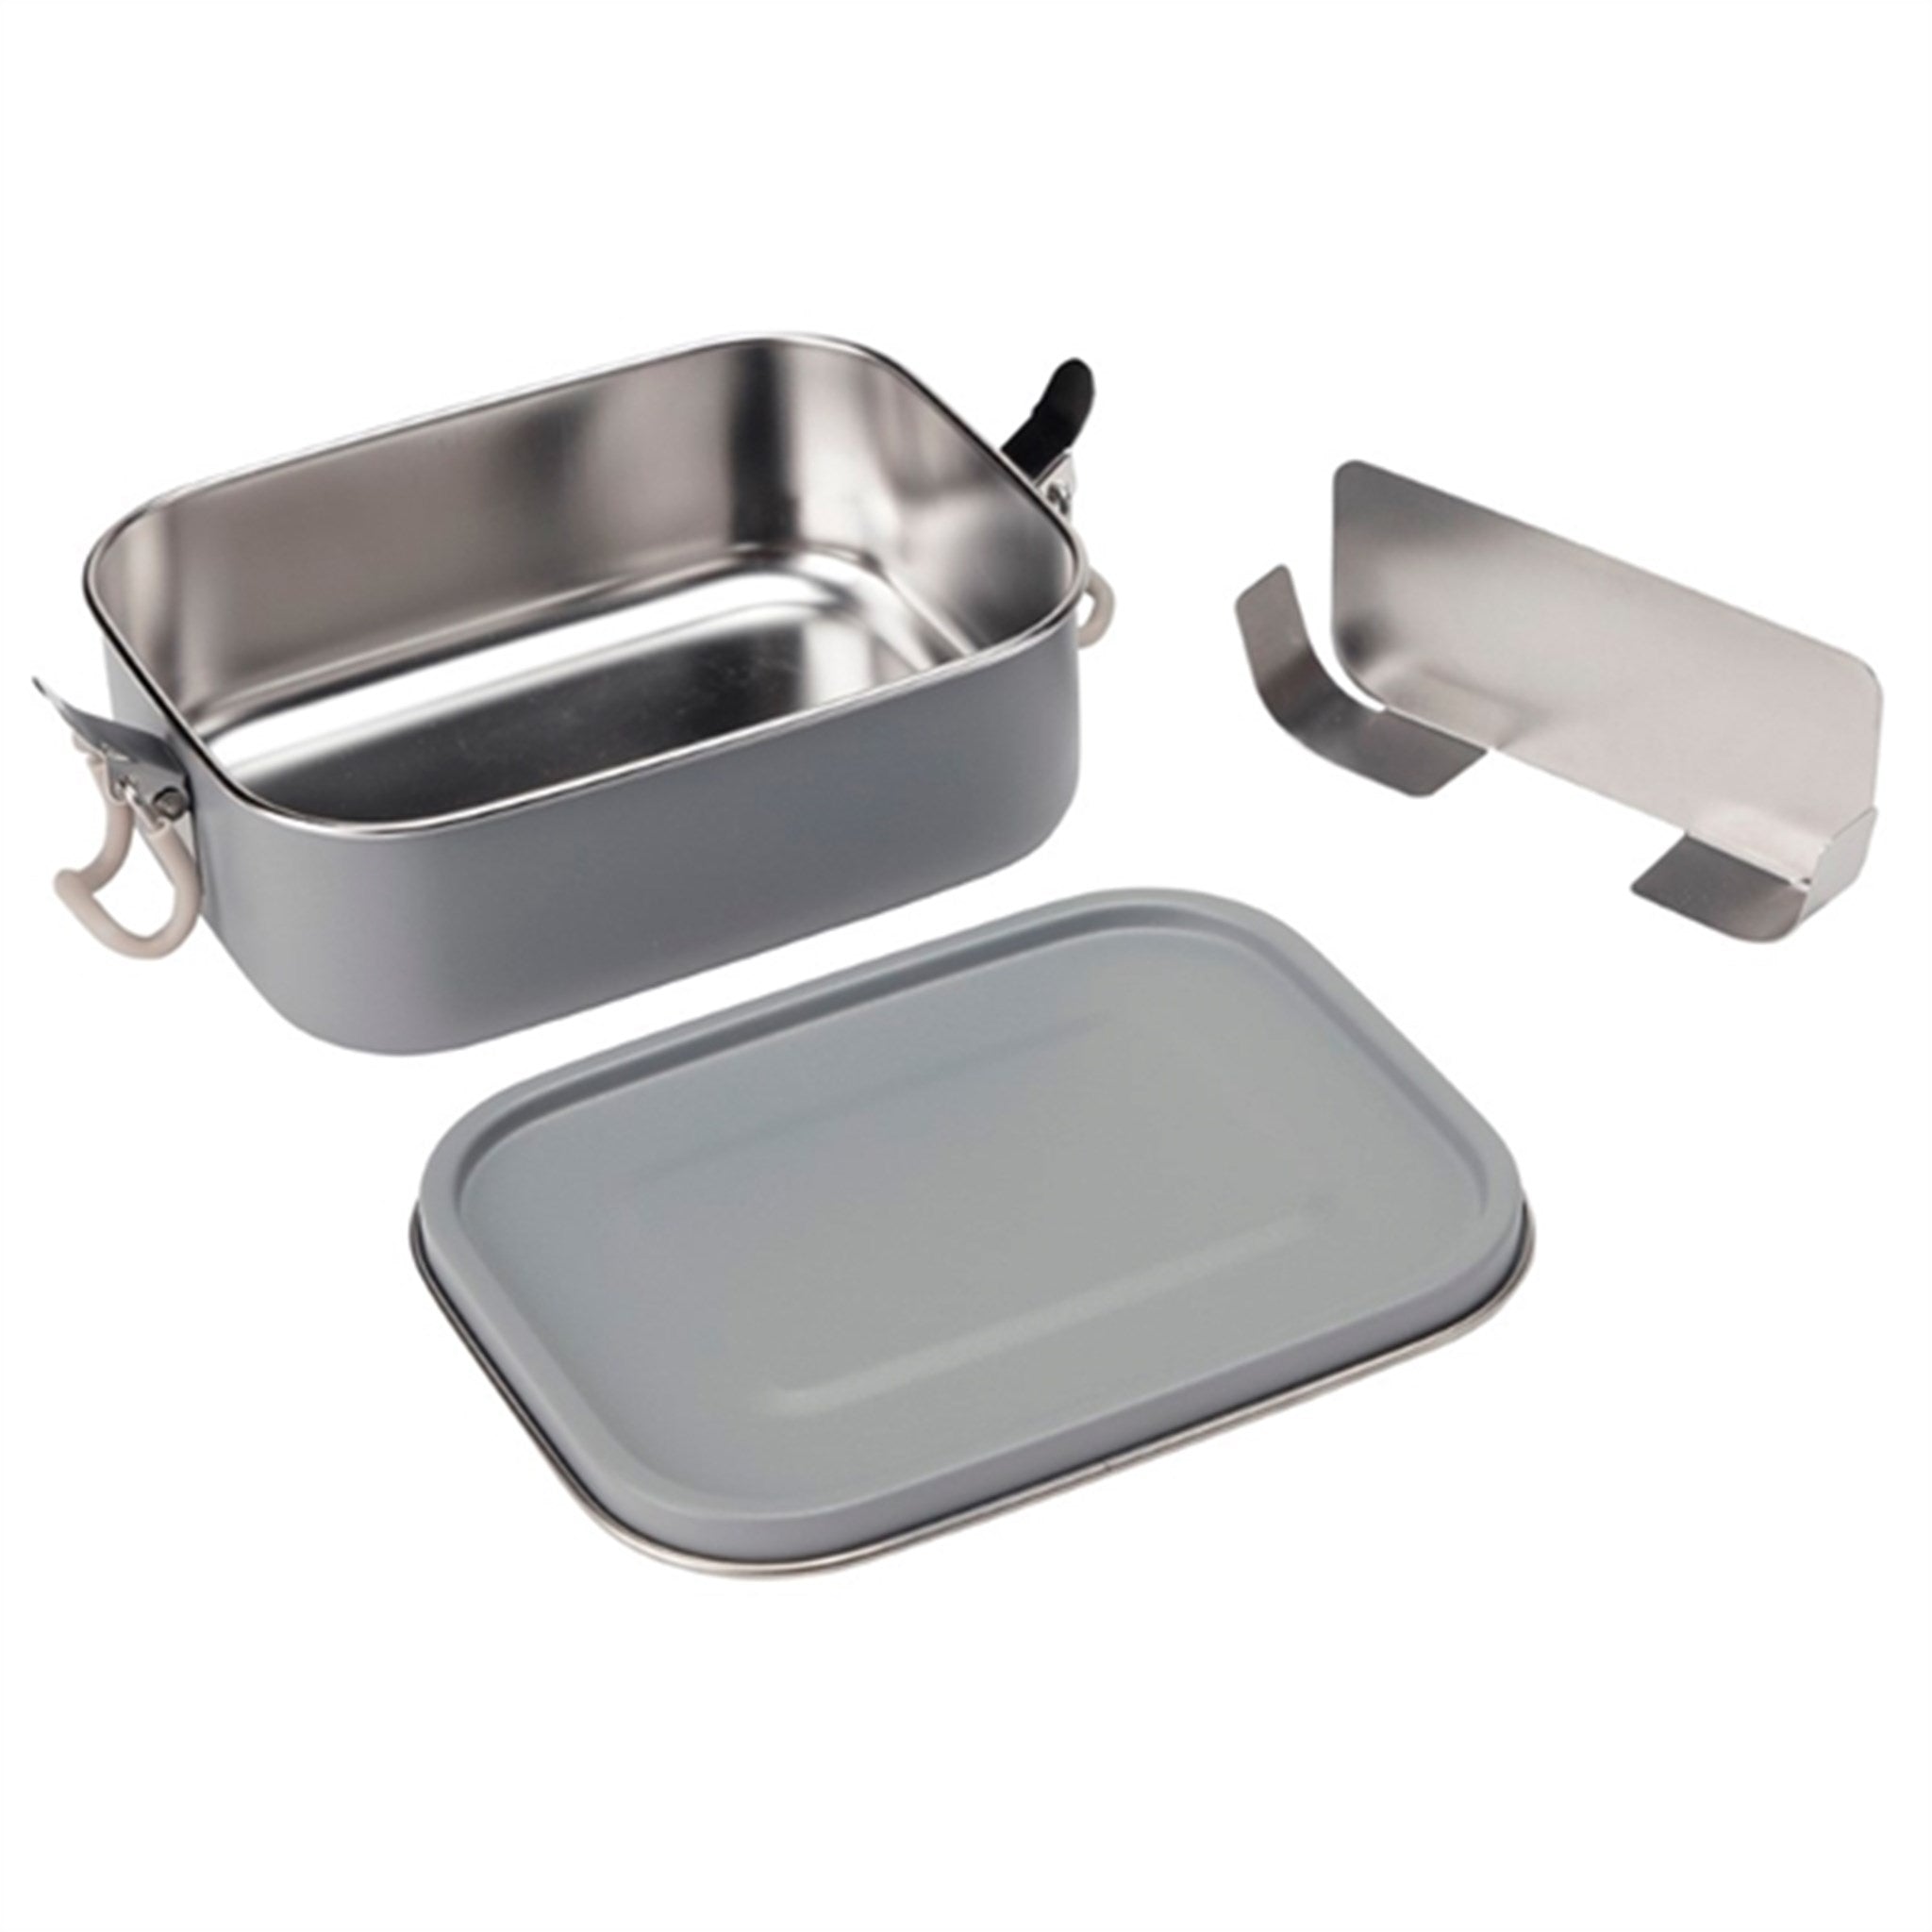 Haps Nordic Lunch Box with Removable Divider Ocean 2